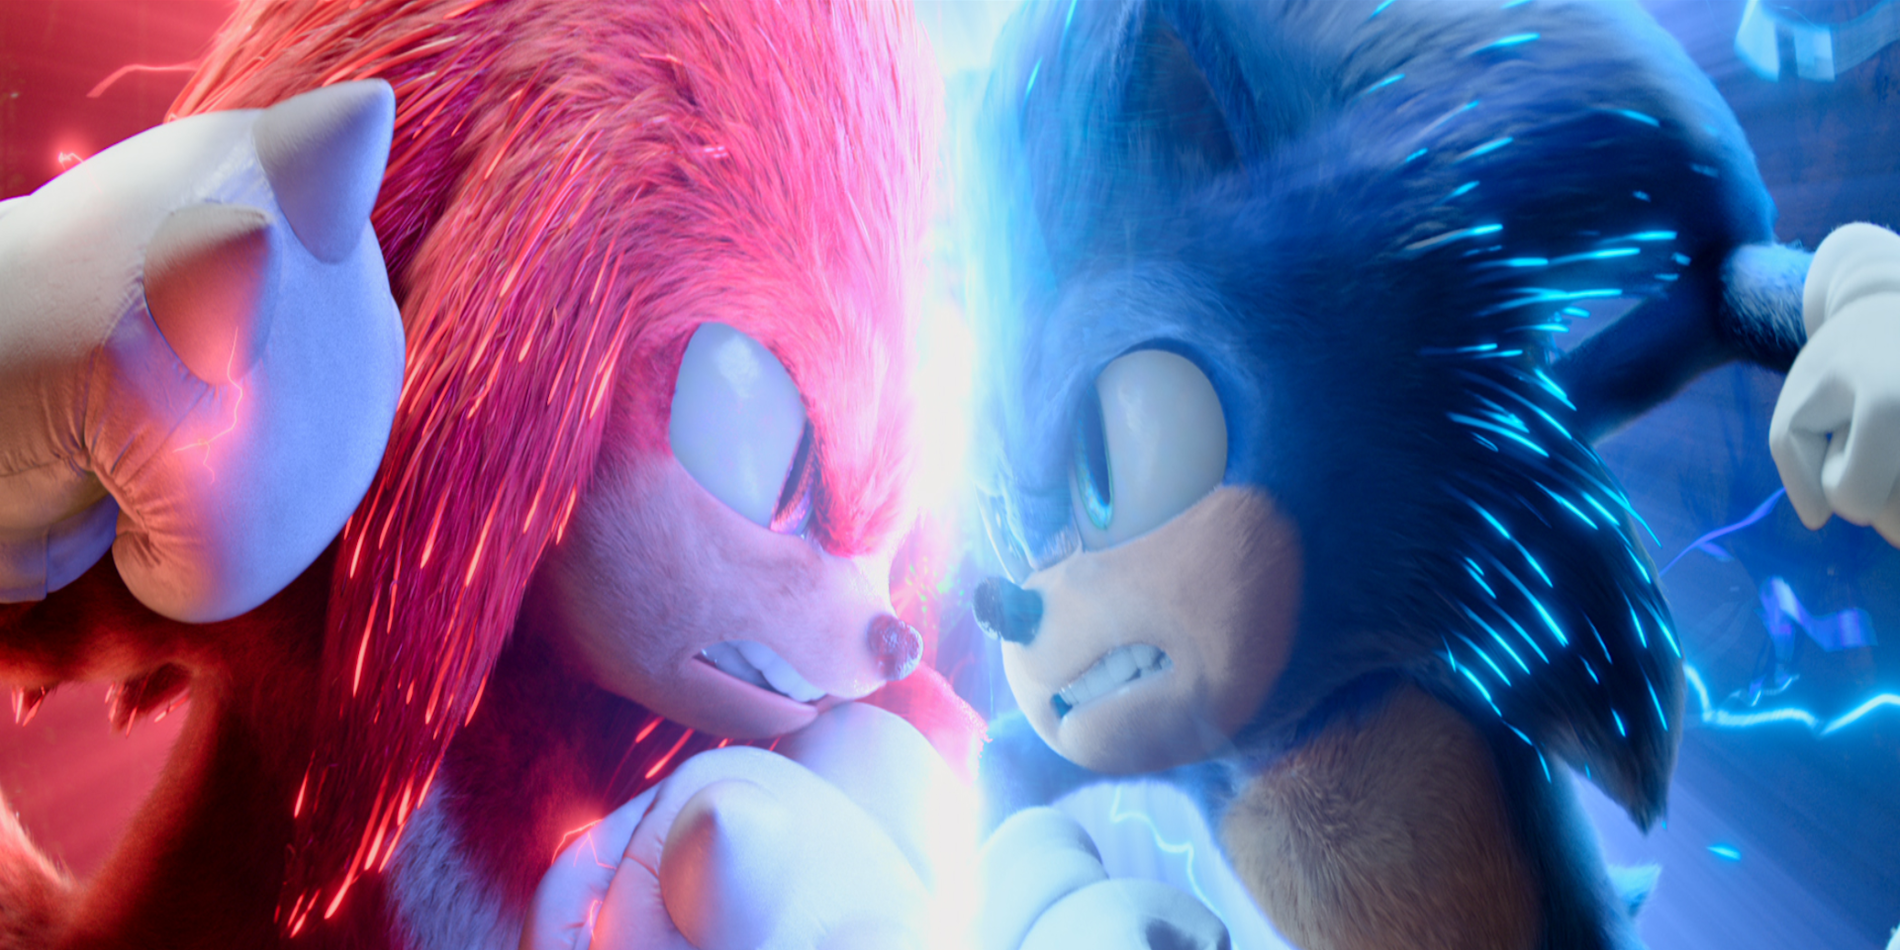 Sonic and Knuckles come face to face in Sonic the Hedgehog 2